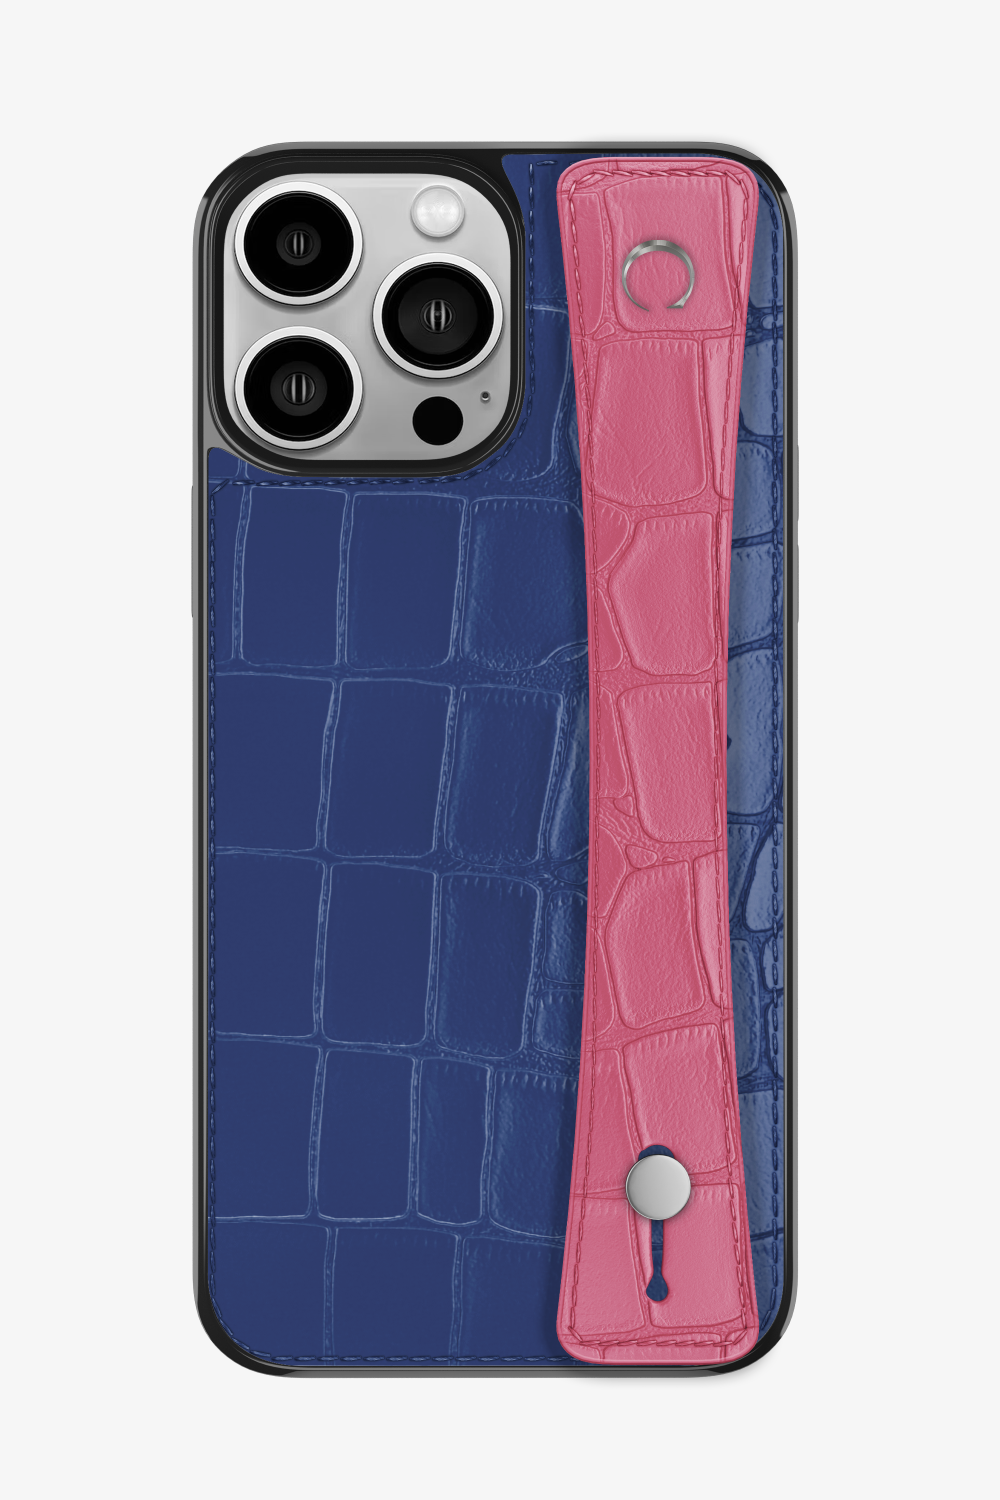 Alligator Sports Strap Case for iPhone 14 Pro Max - Navy Blue / Pink - zollofrance